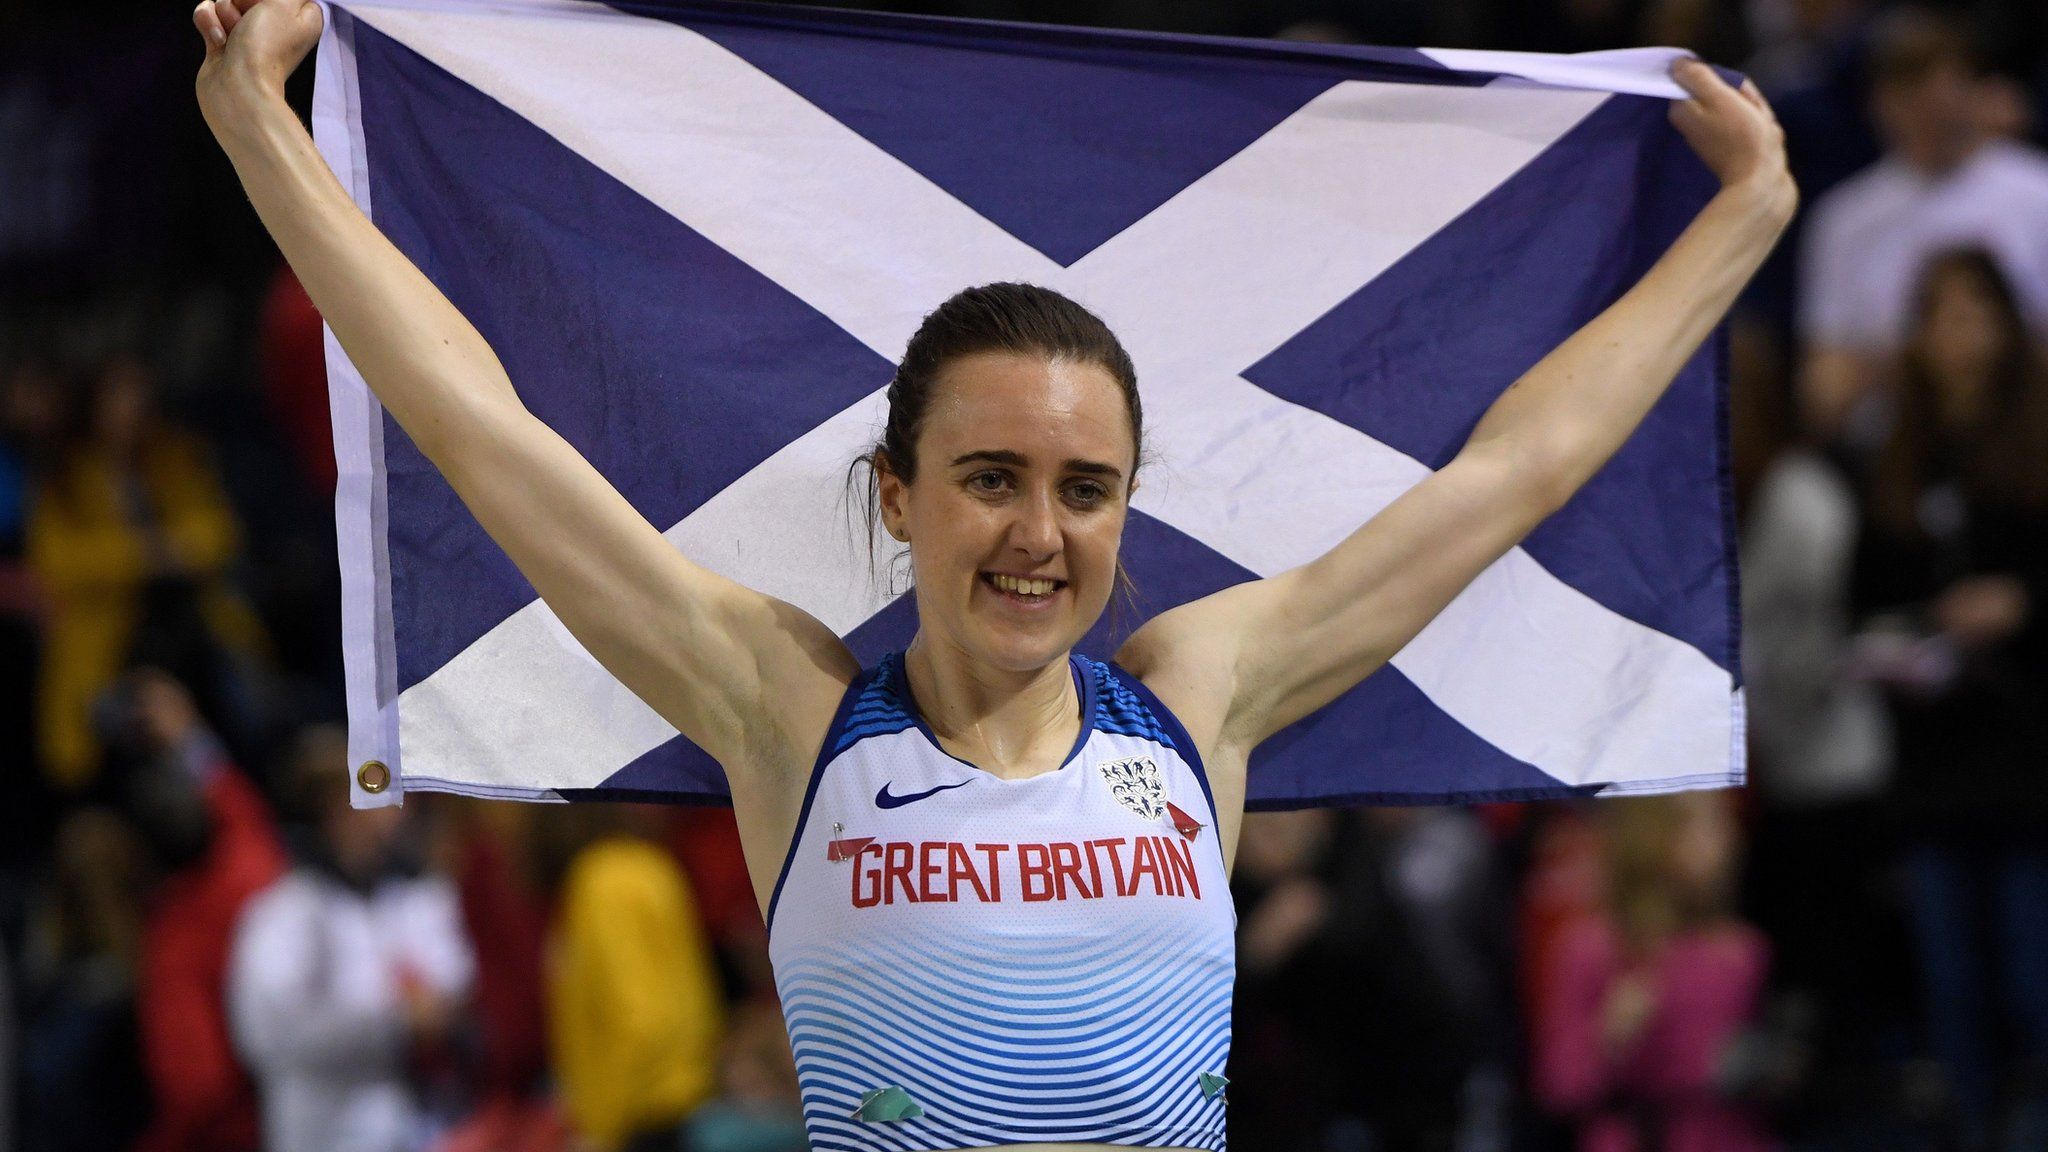 Britain's Laura Muir poses with a Scottish Saltire flag after taking first place during the women's 1000m final at the Müller Indoor Grand Prix Glasgow 2020 athletics in Glasgow on February 15, 2020.